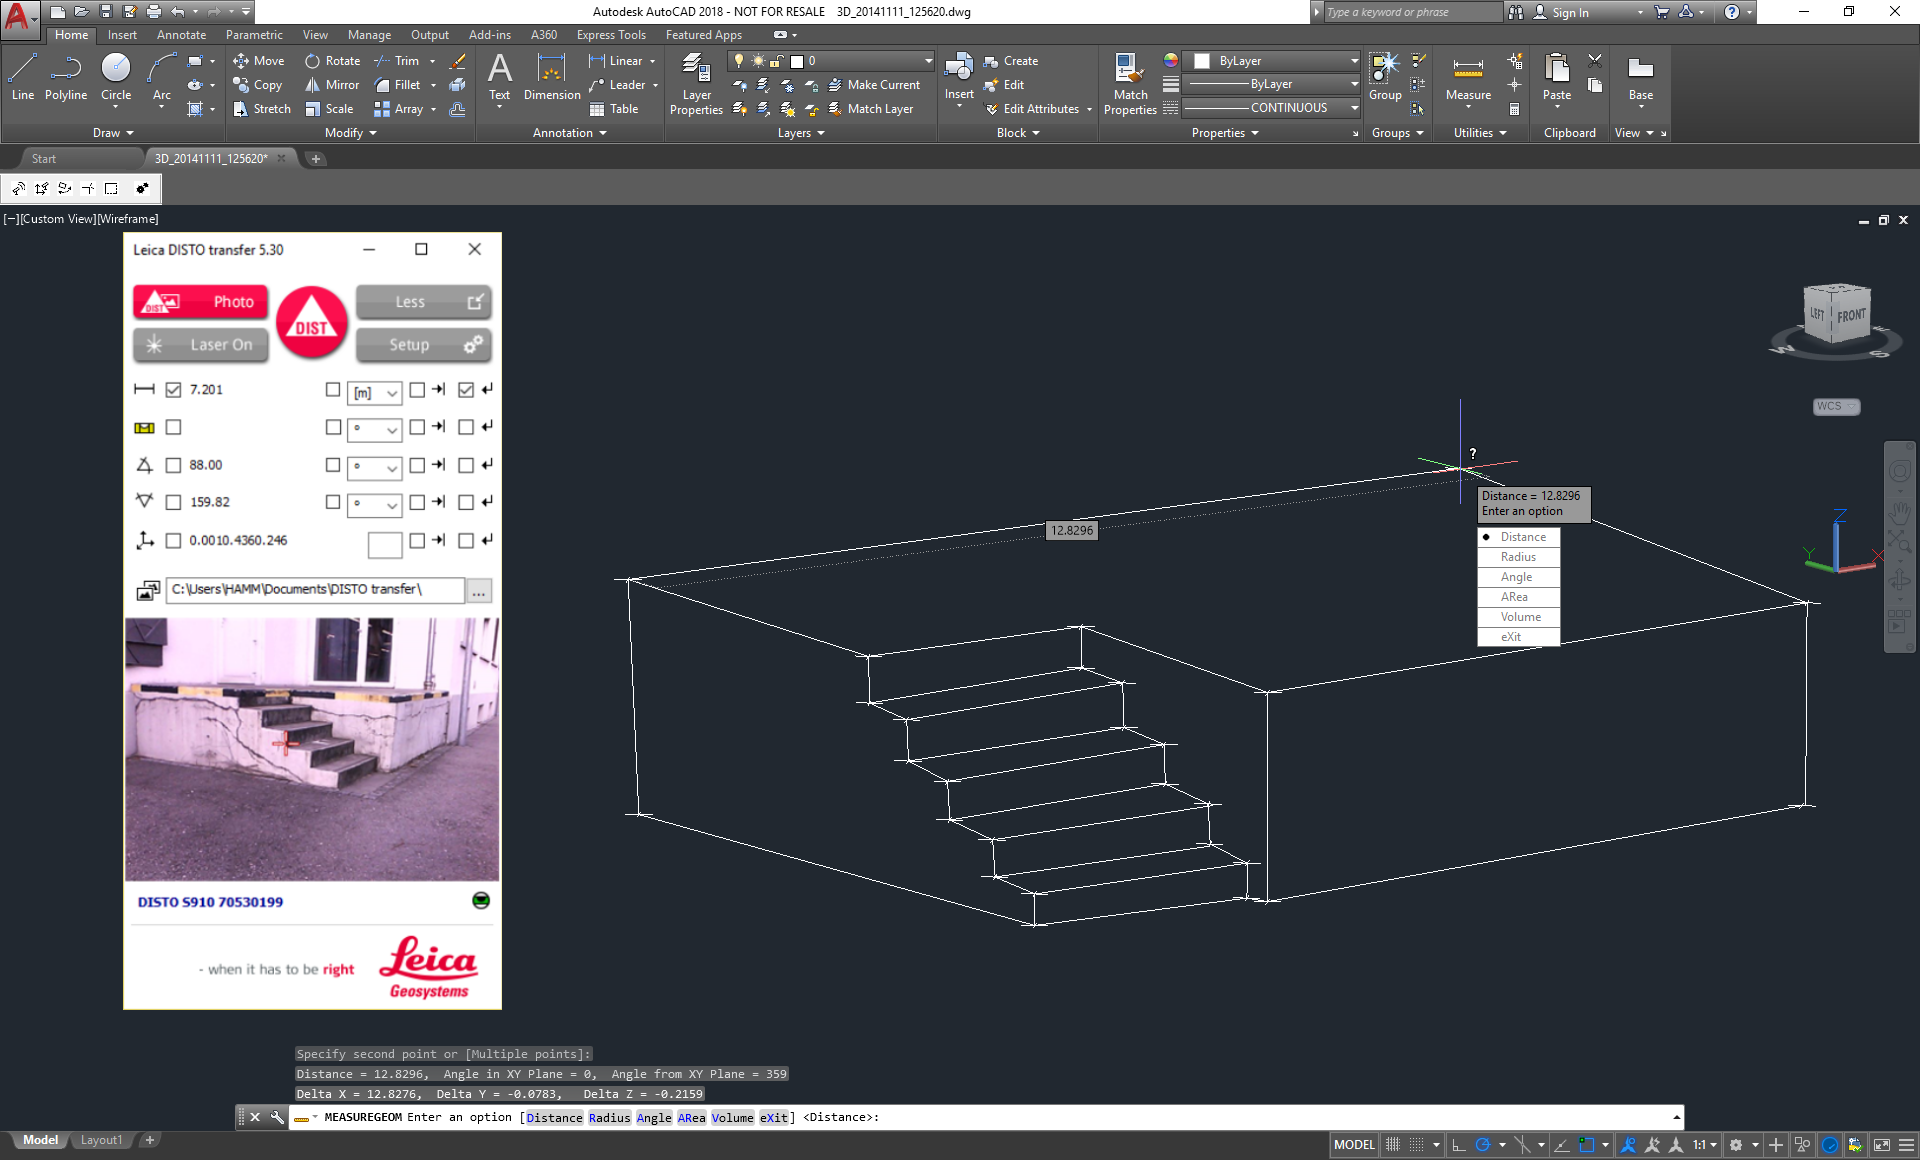 Screen shows 3D data of a staircase and a raised surface as well as the data captured with the Leica DISTO laser measure